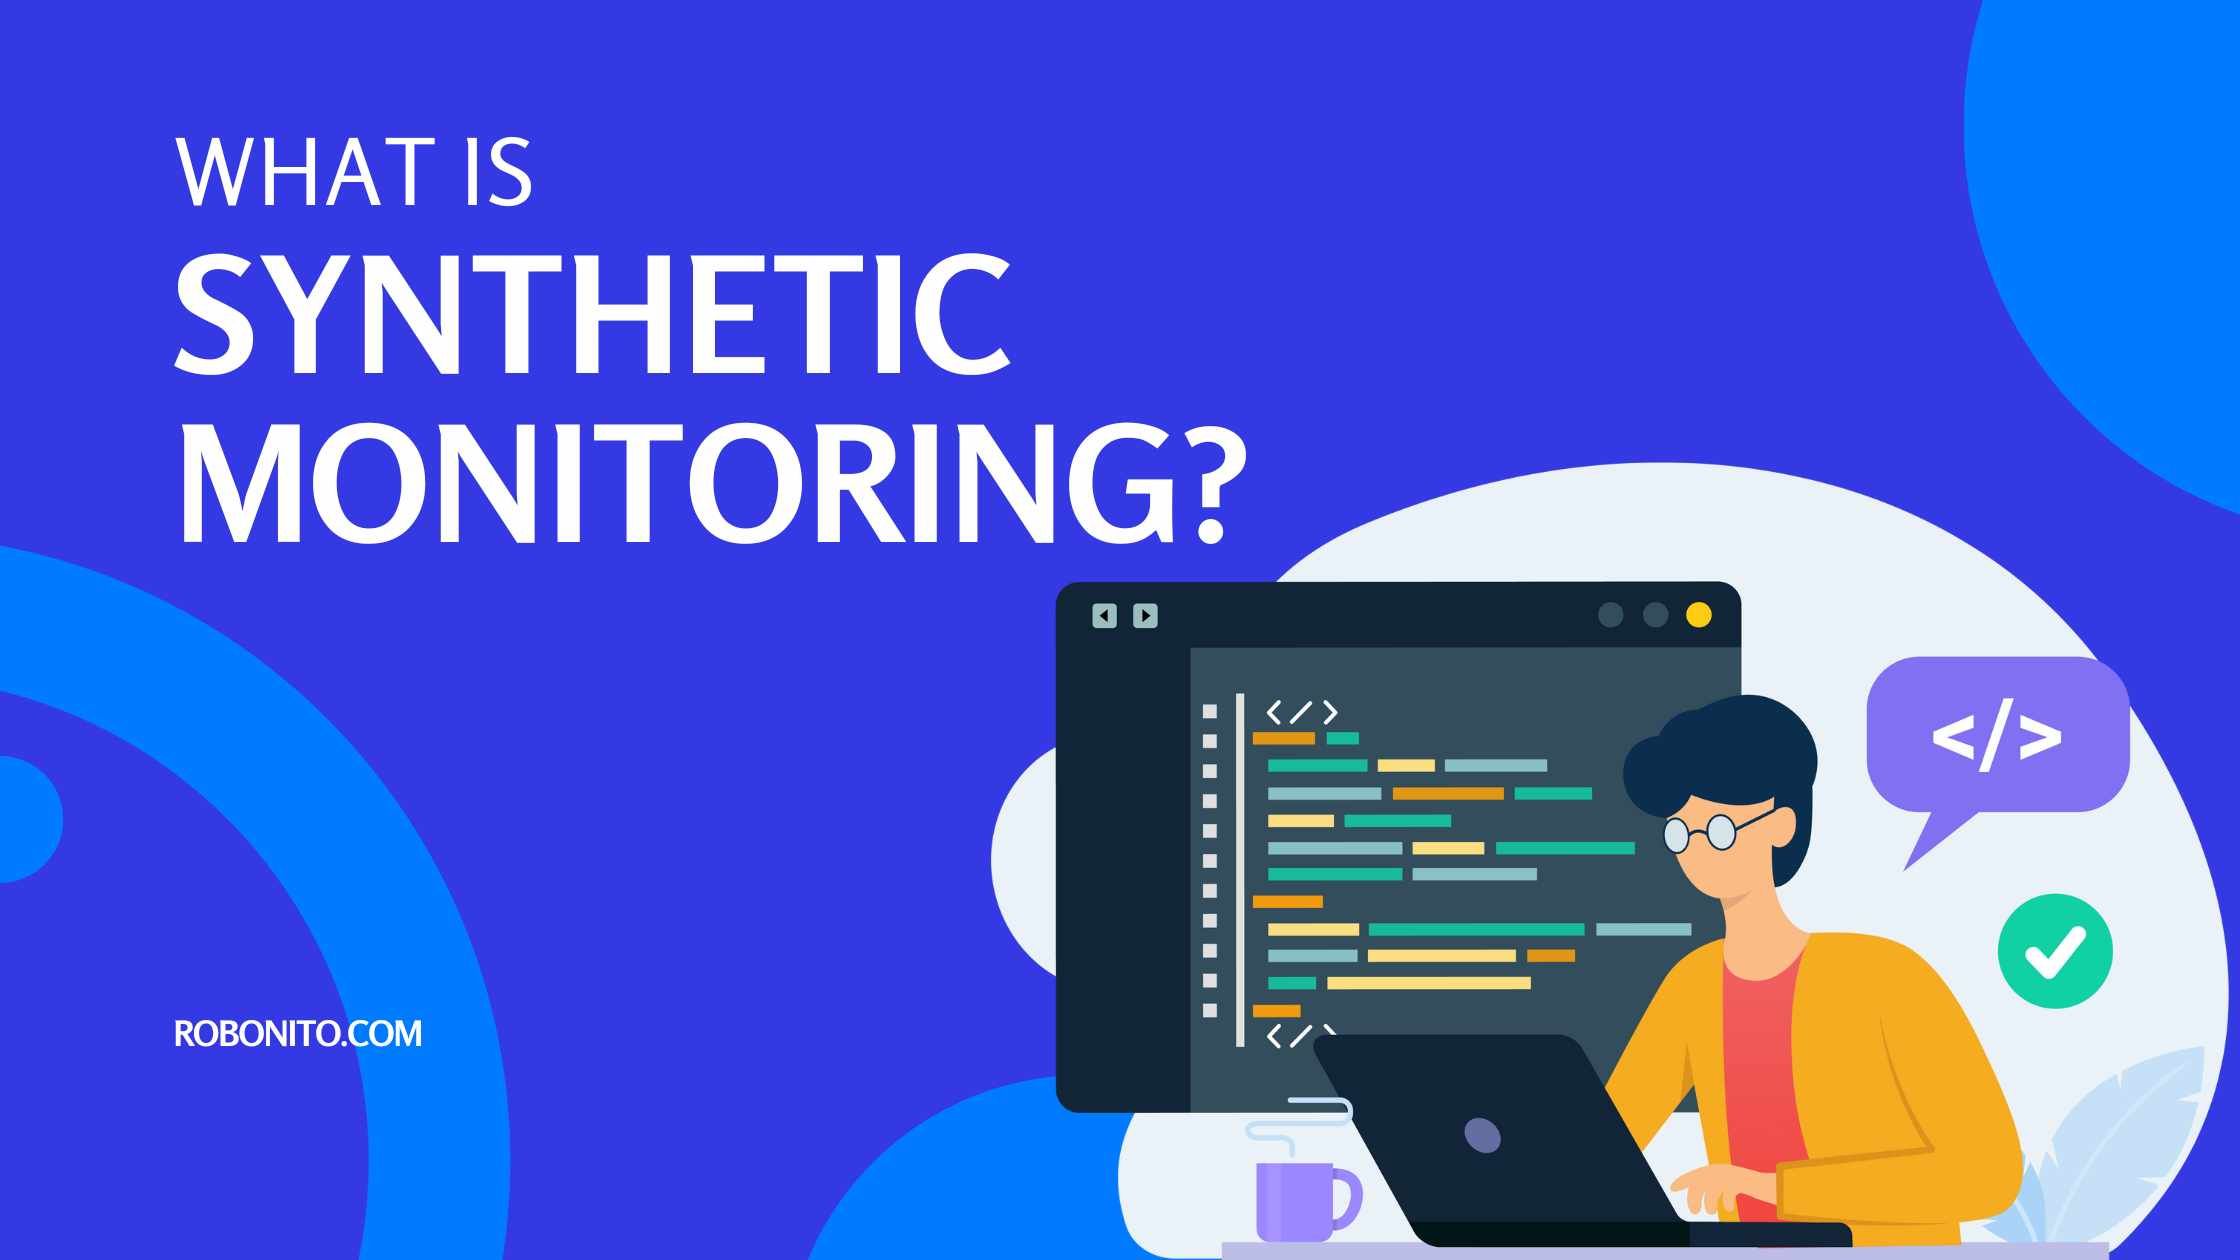 Synthetic Monitoring